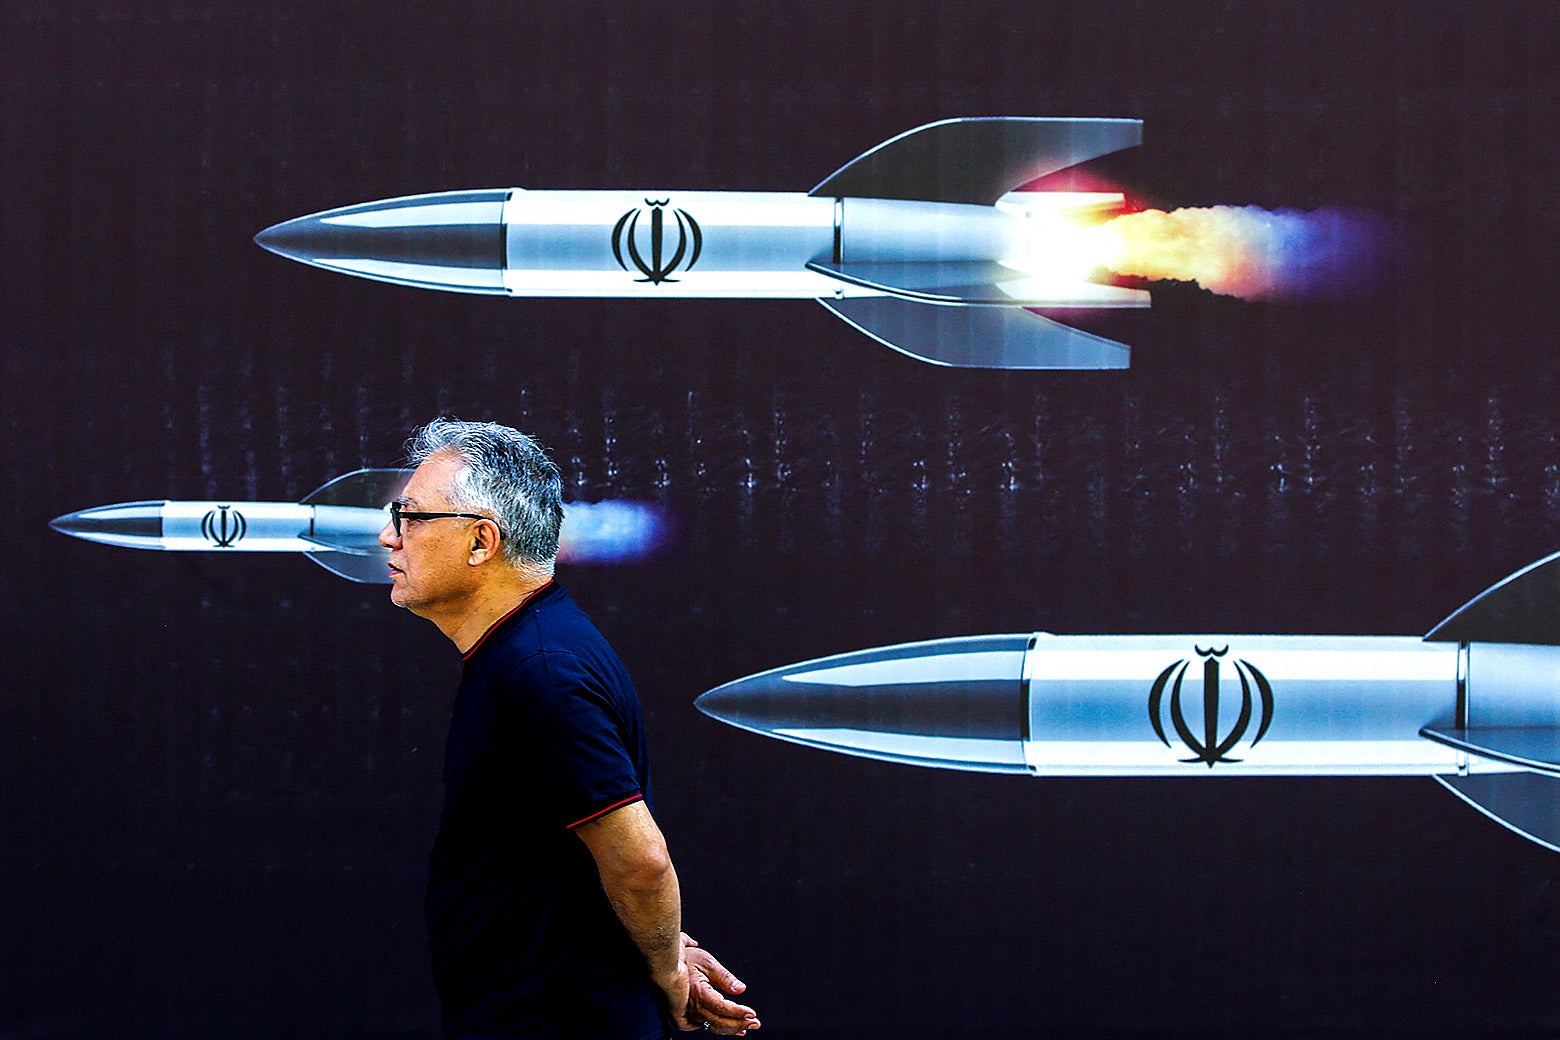 A man walking in front of a poster with missiles on it that takes up the full frame.